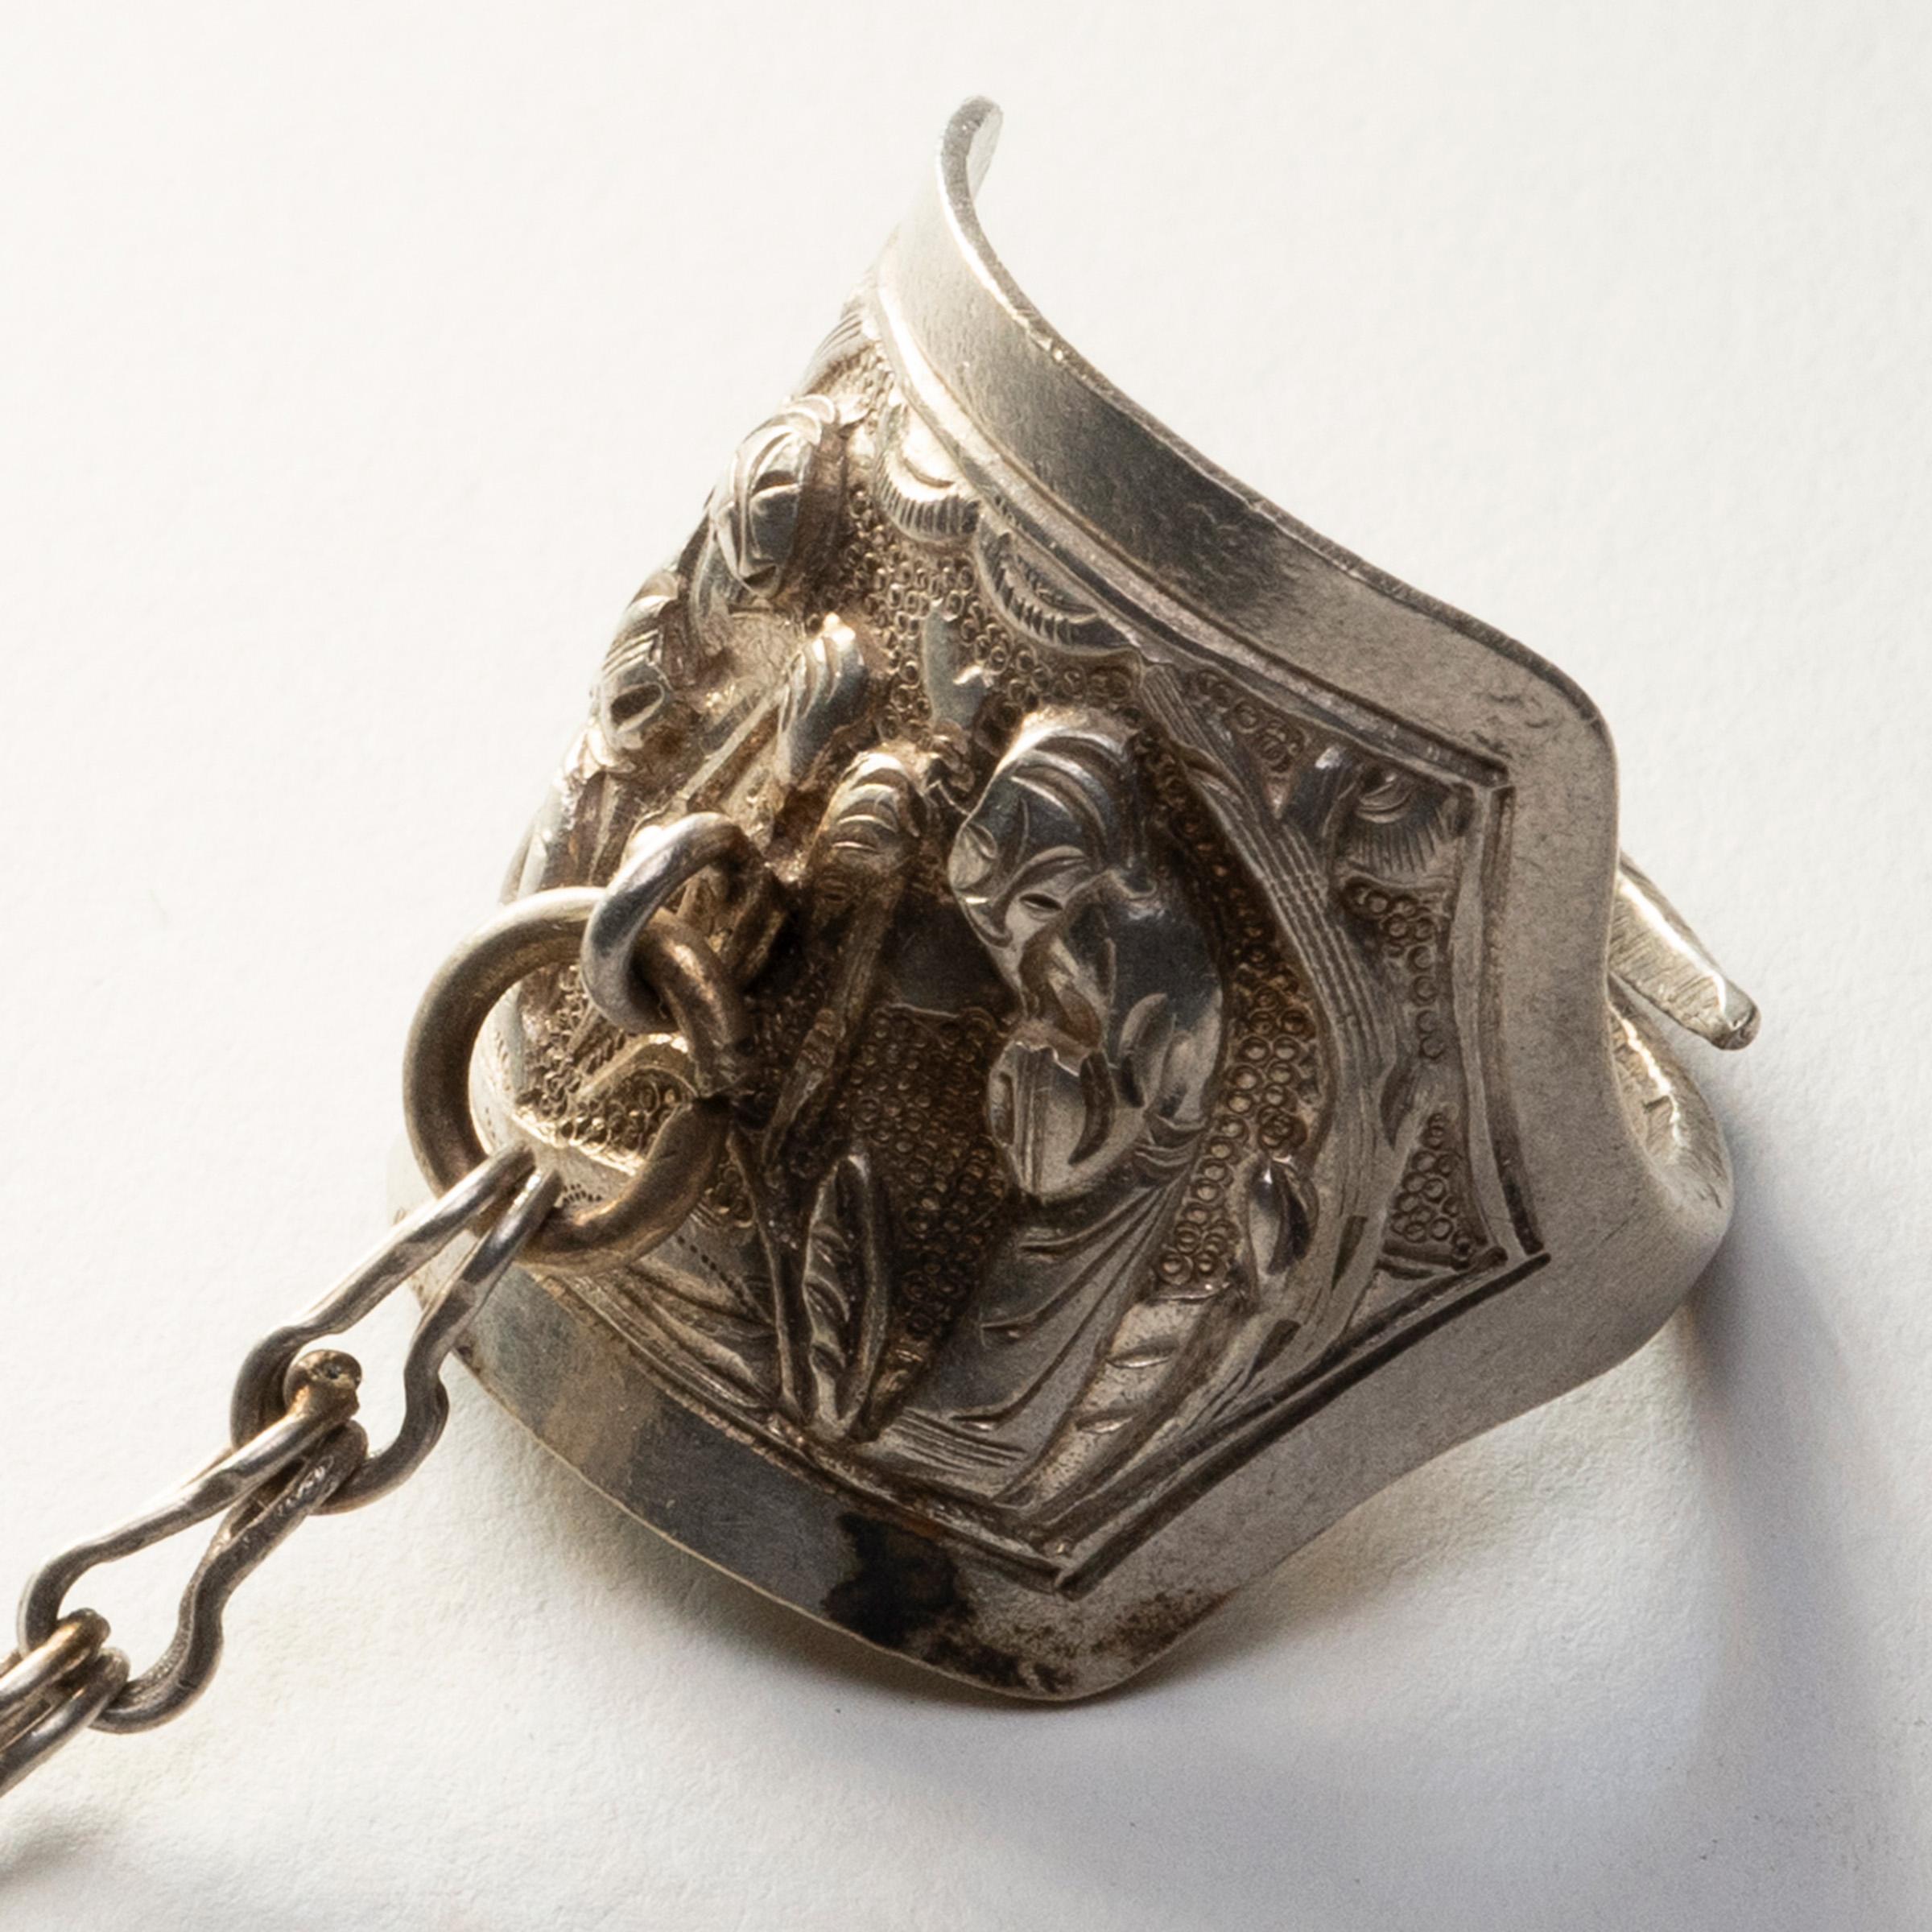 Dated to the late 19th century, this silver charm ring was believed to protect the wearer from bad luck and malevolent spirits. The ring is decorated in relief with a scene of two robed scholars strolling through a garden, surrounded by pine trees